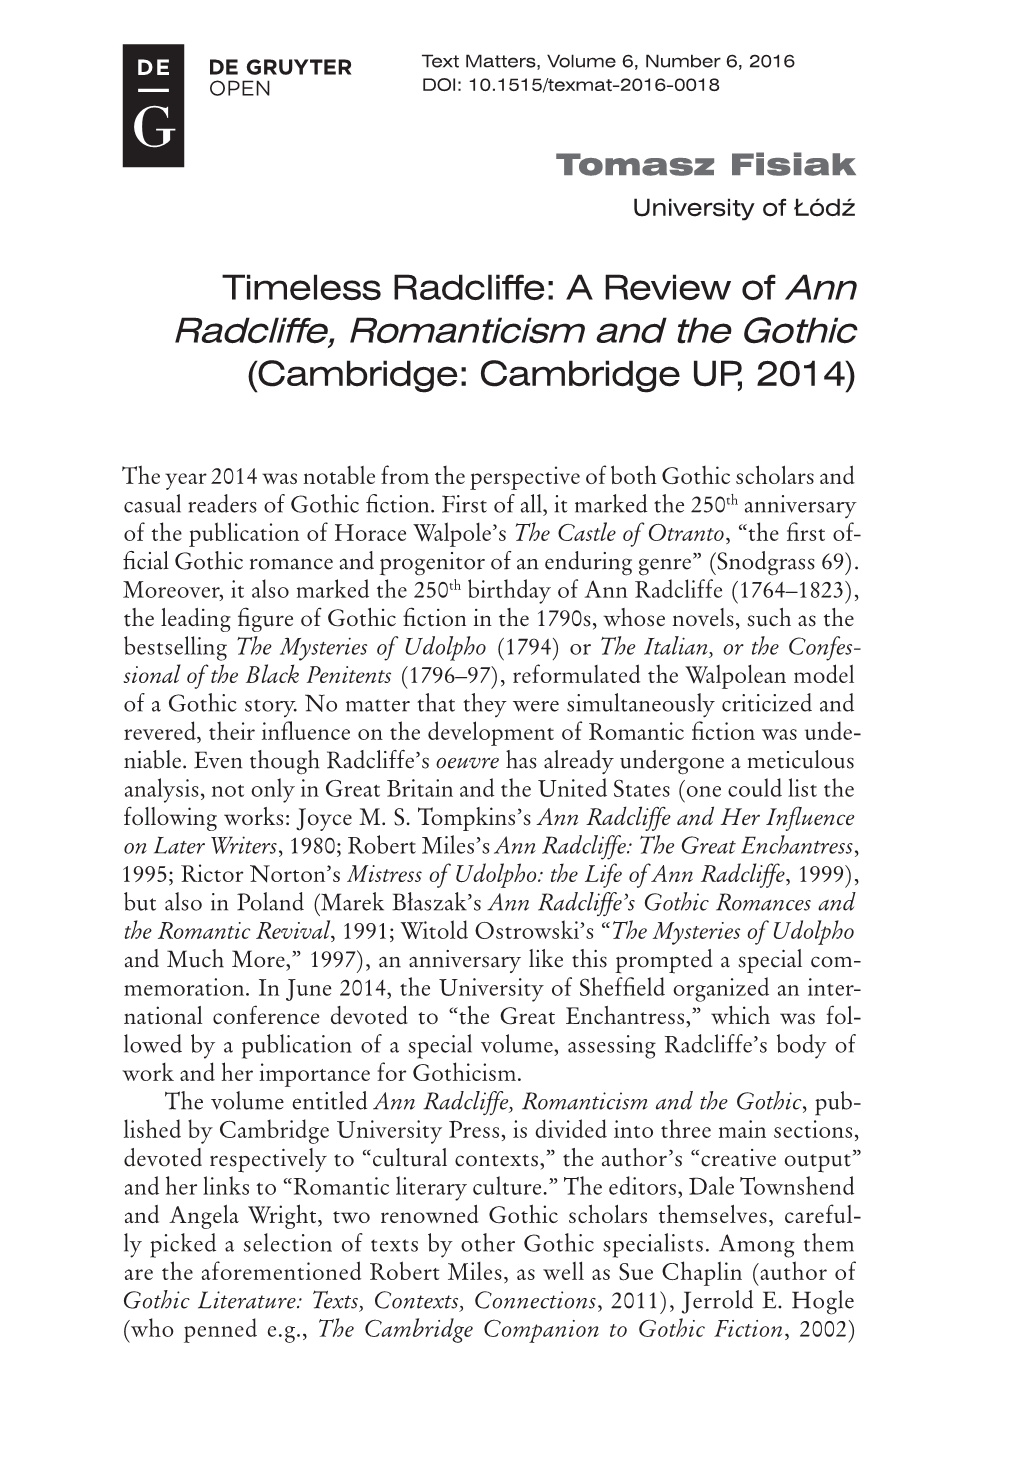 A Review of Ann Radcliffe, Romanticism and the Gothic (Cambridge: Cambridge UP, 2014)